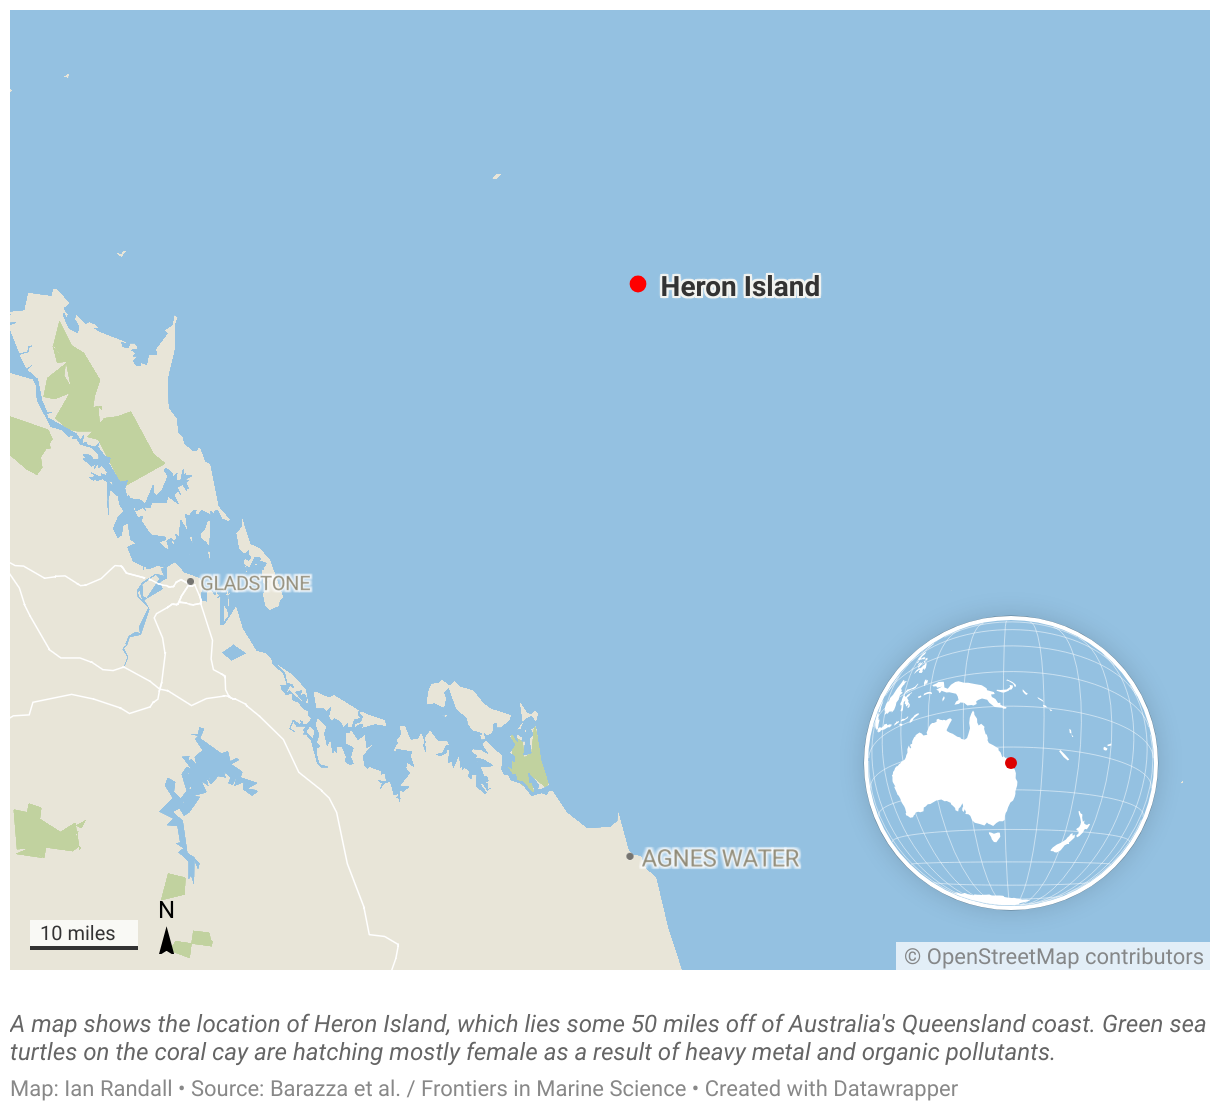 A map showing the location of Heron Island, which lies some 50 miles off of Australia's Queensland coast.